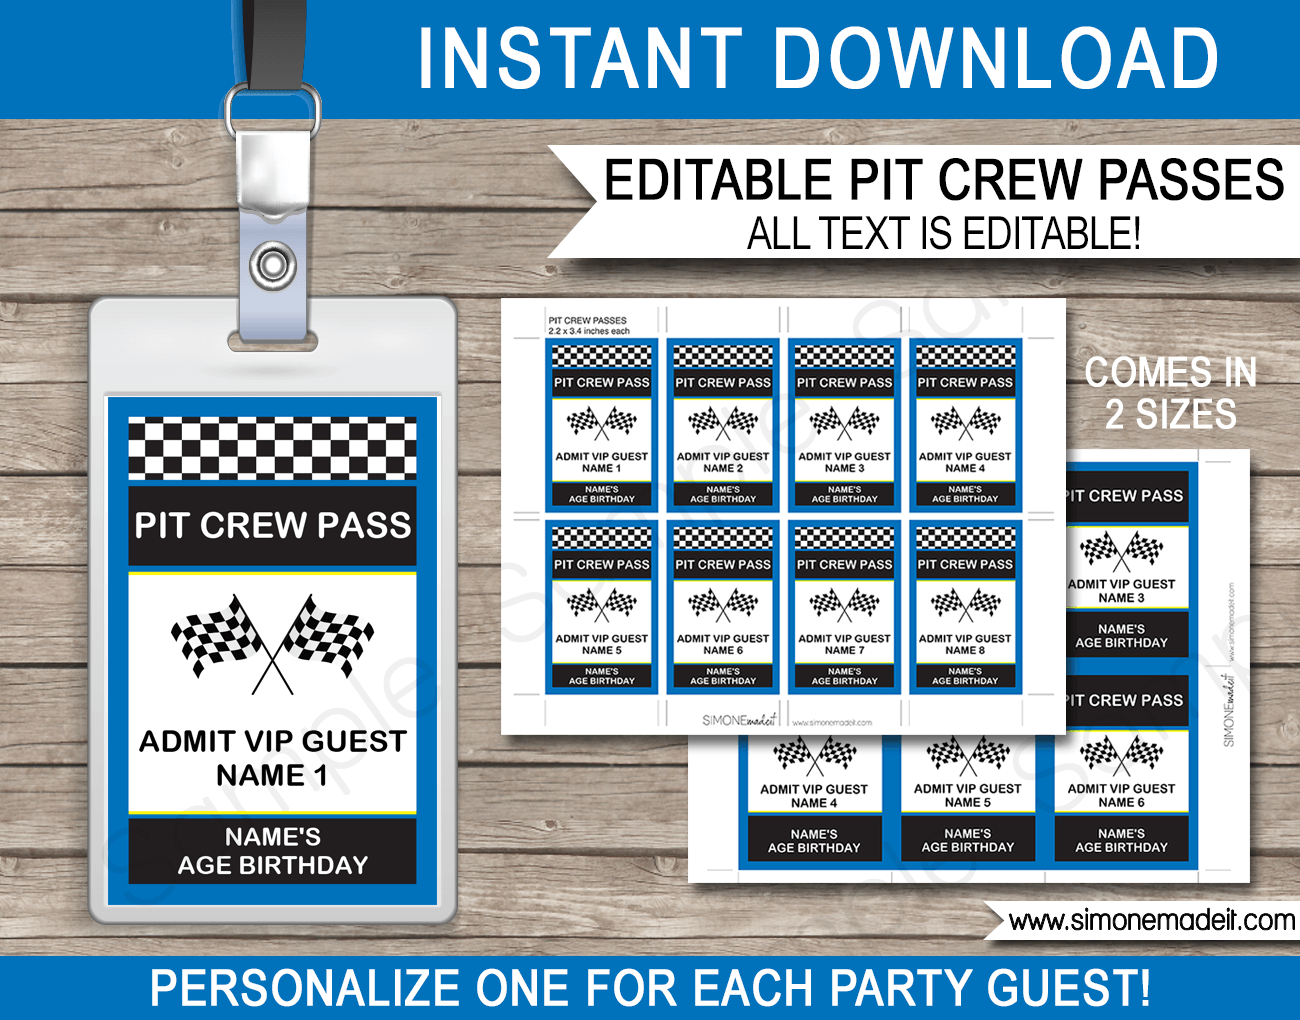 Race Car Birthday Party Pit Crew Passes | Printable Inserts | Party Favors | Editable DIY Template | $3.50 INSTANT DOWNLOAD via SIMONEmadeit.com